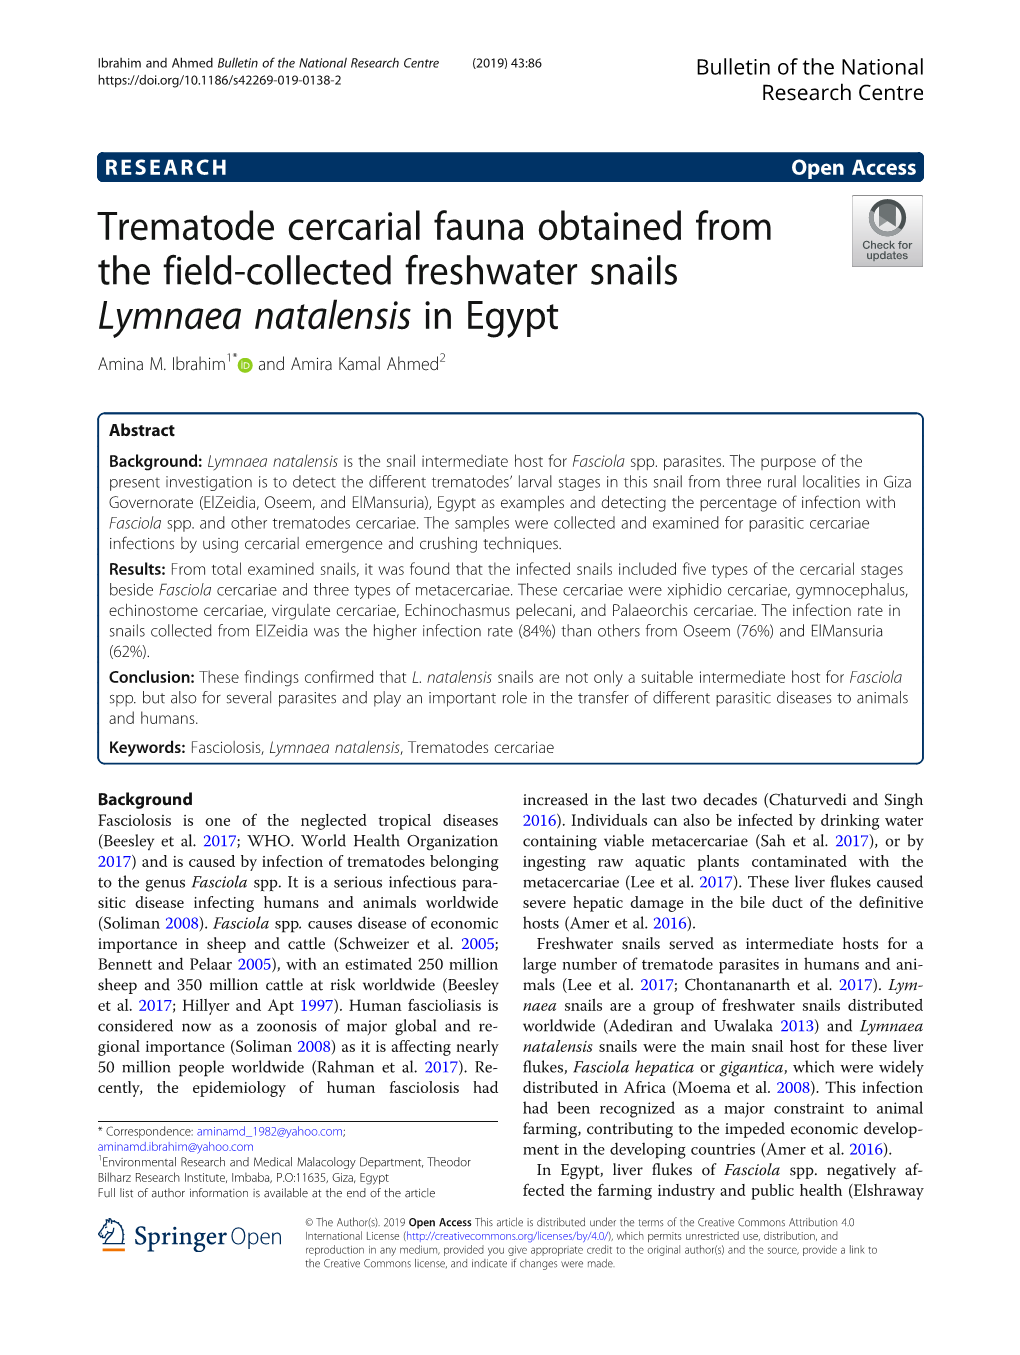 Trematode Cercarial Fauna Obtained from the Field-Collected Freshwater Snails Lymnaea Natalensis in Egypt Amina M